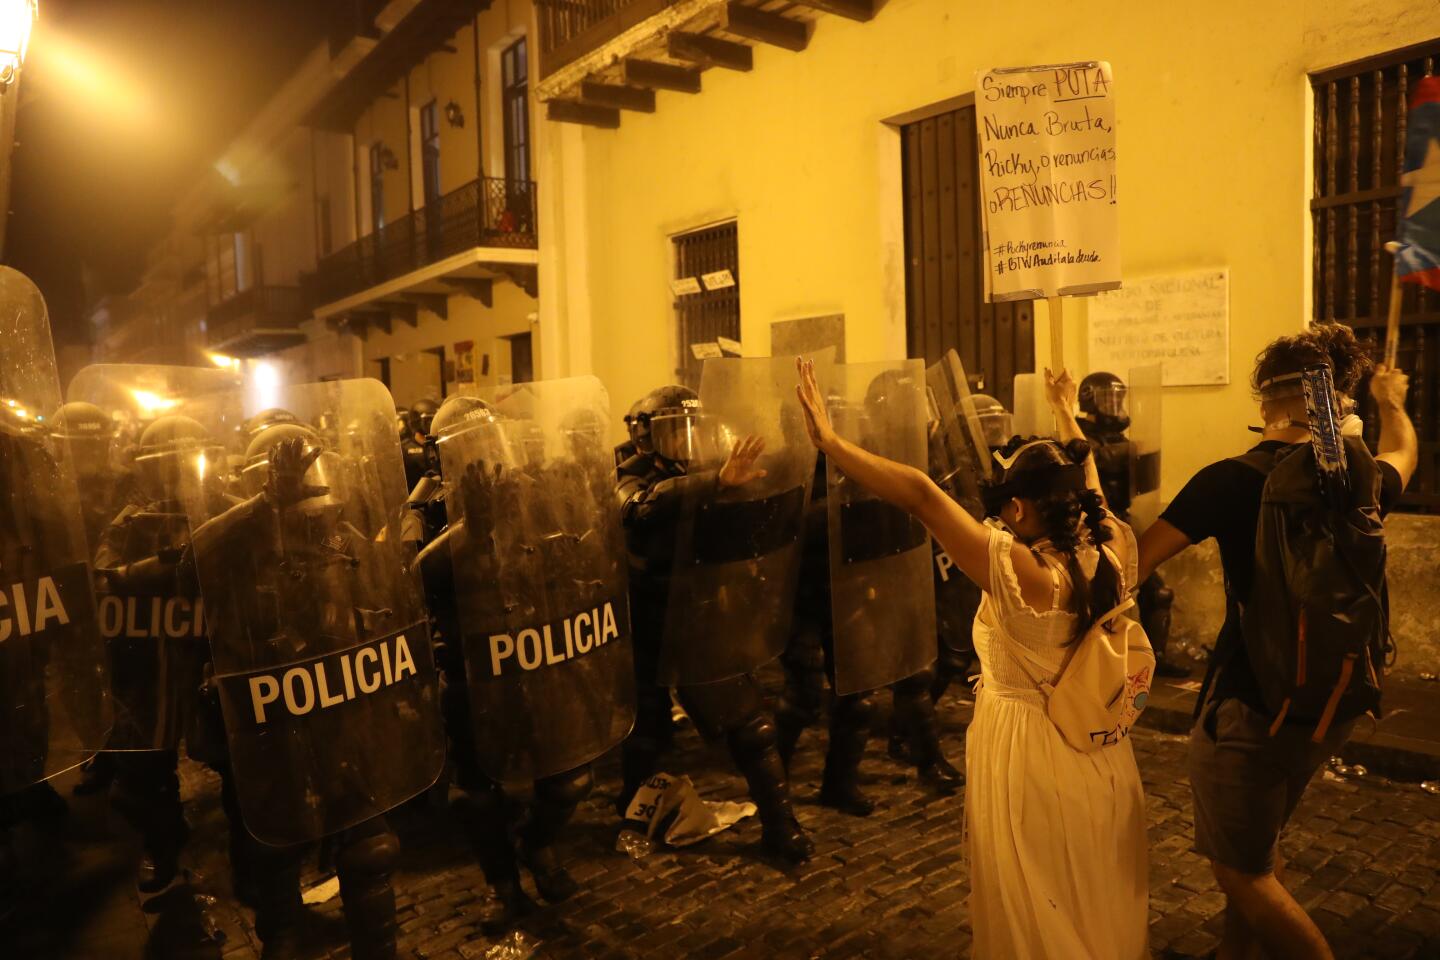 Police in riot gear advance on demonstrators during protests against Puerto Rico Gov. Ricardo Rossello in Old San Juan.